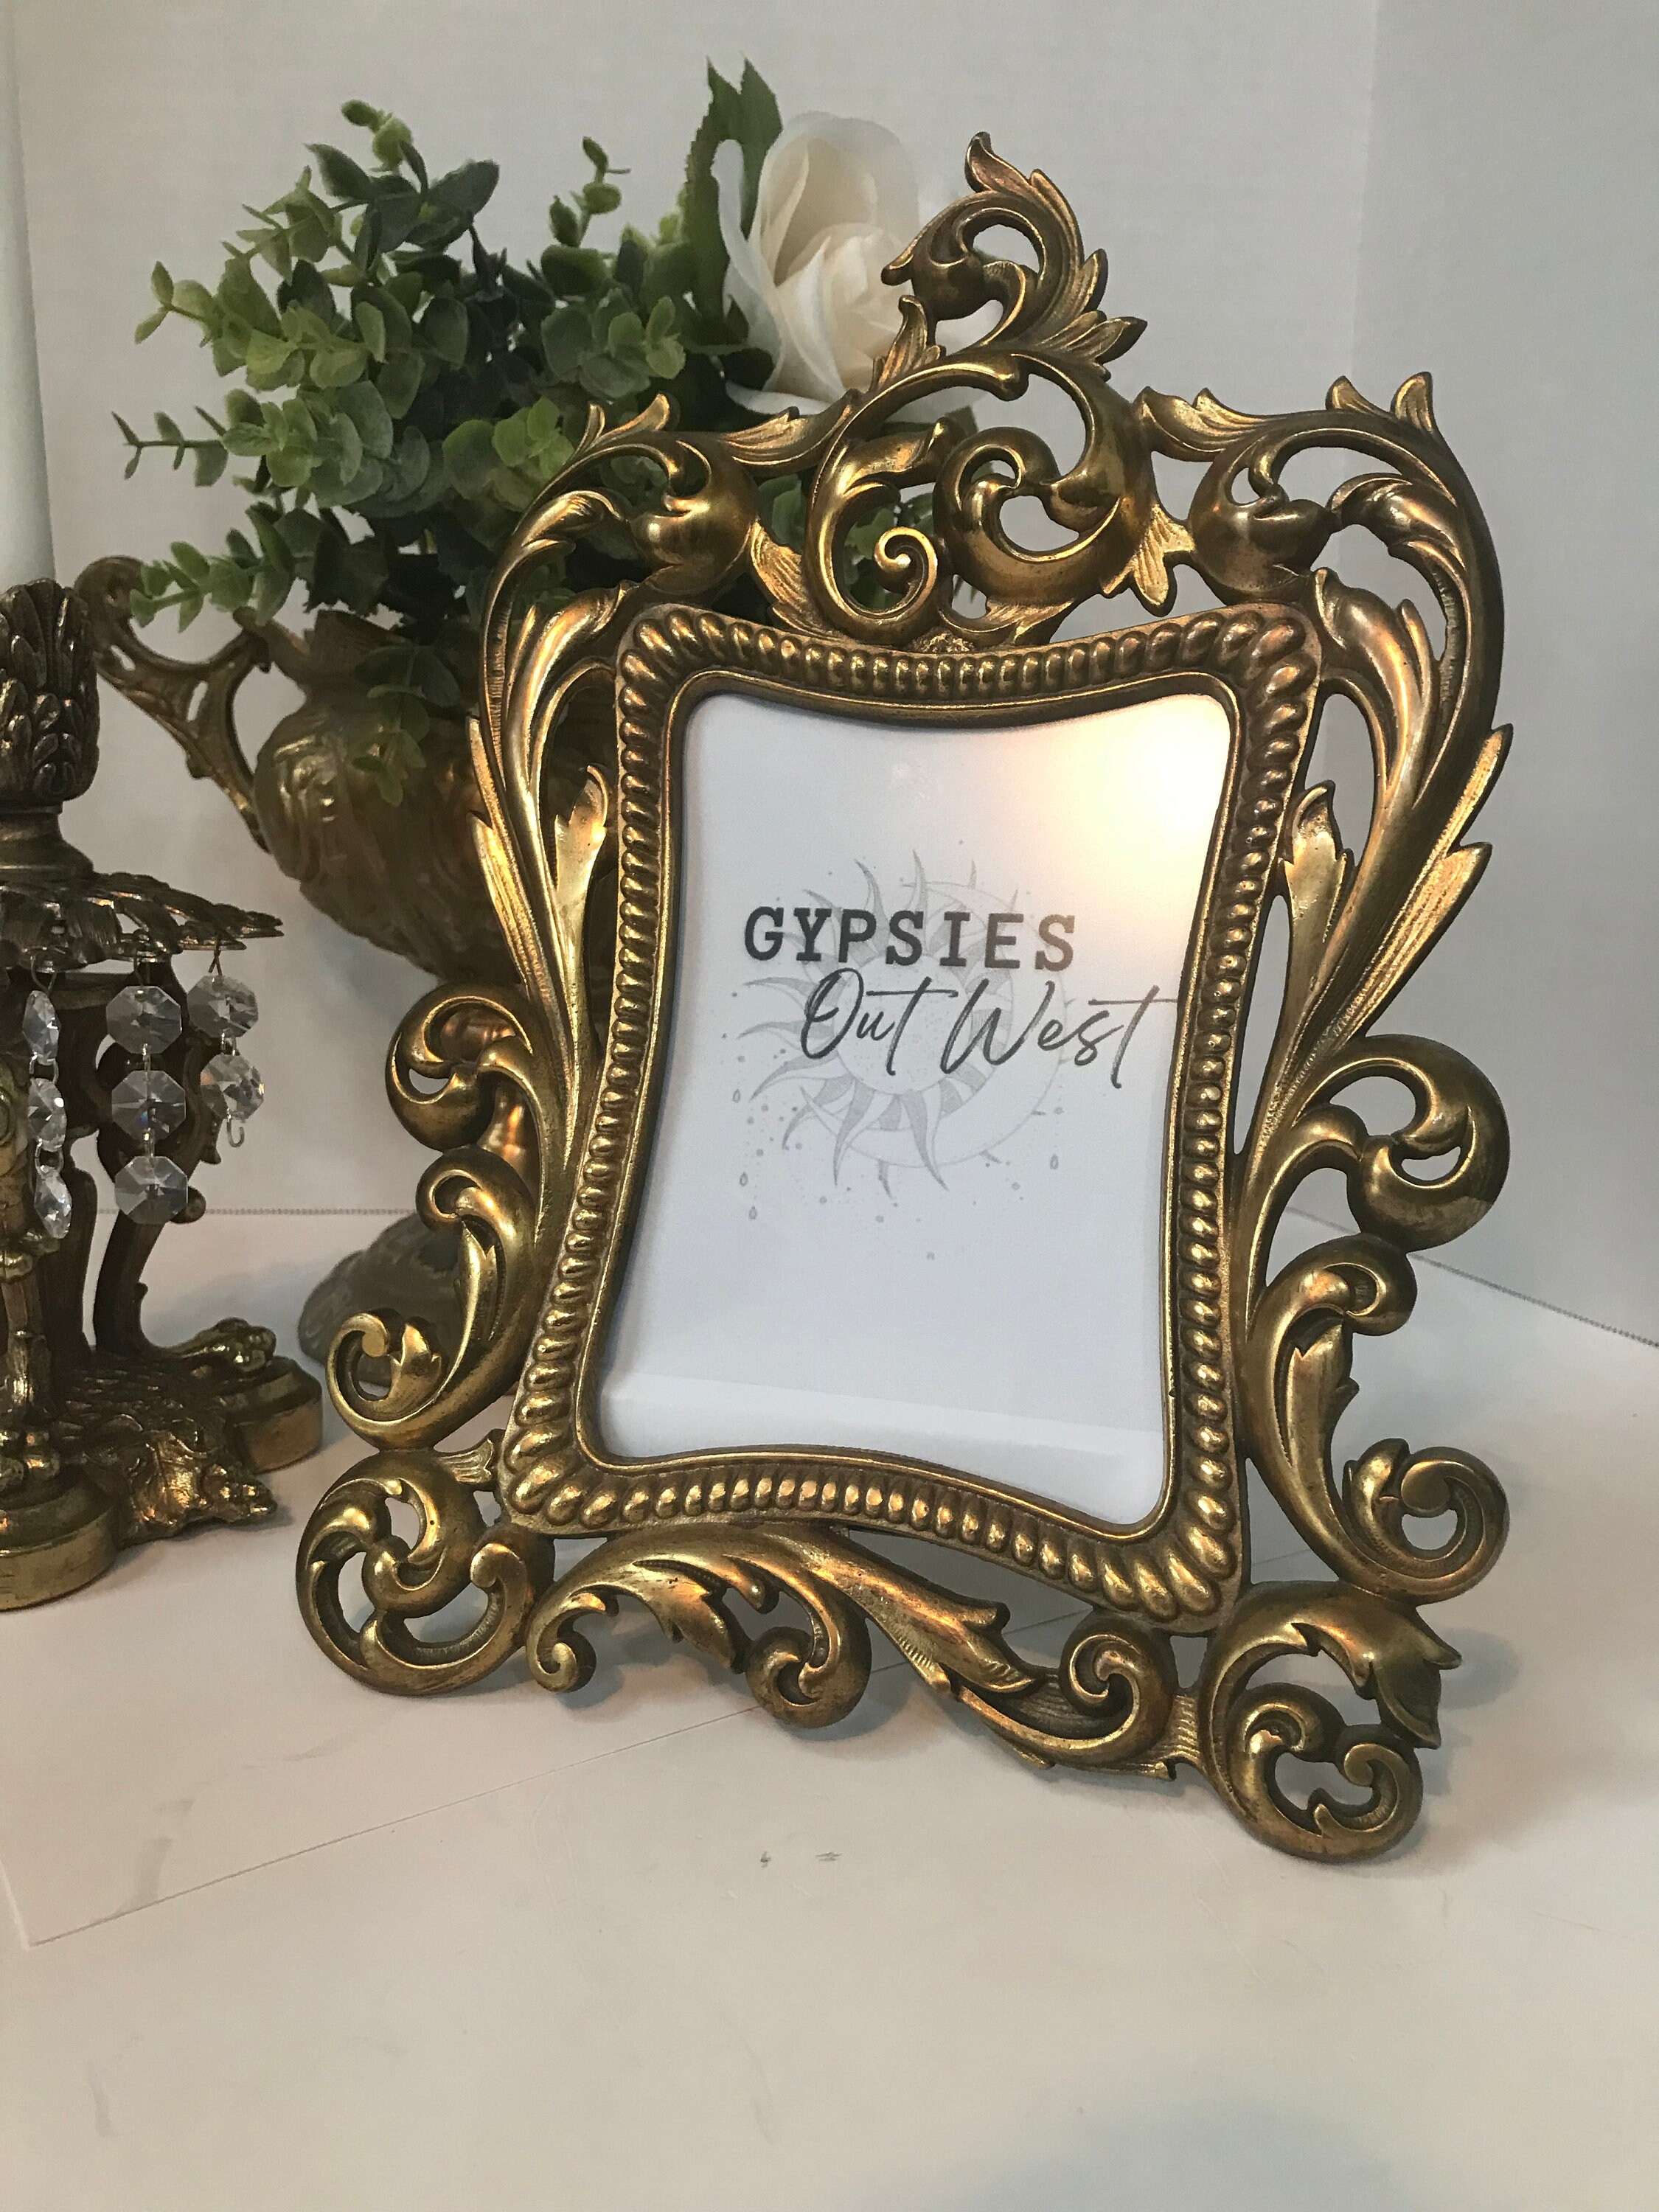 Antique Gold Ornate 4 x 6 Frame, Expressions™ by Studio Décor®